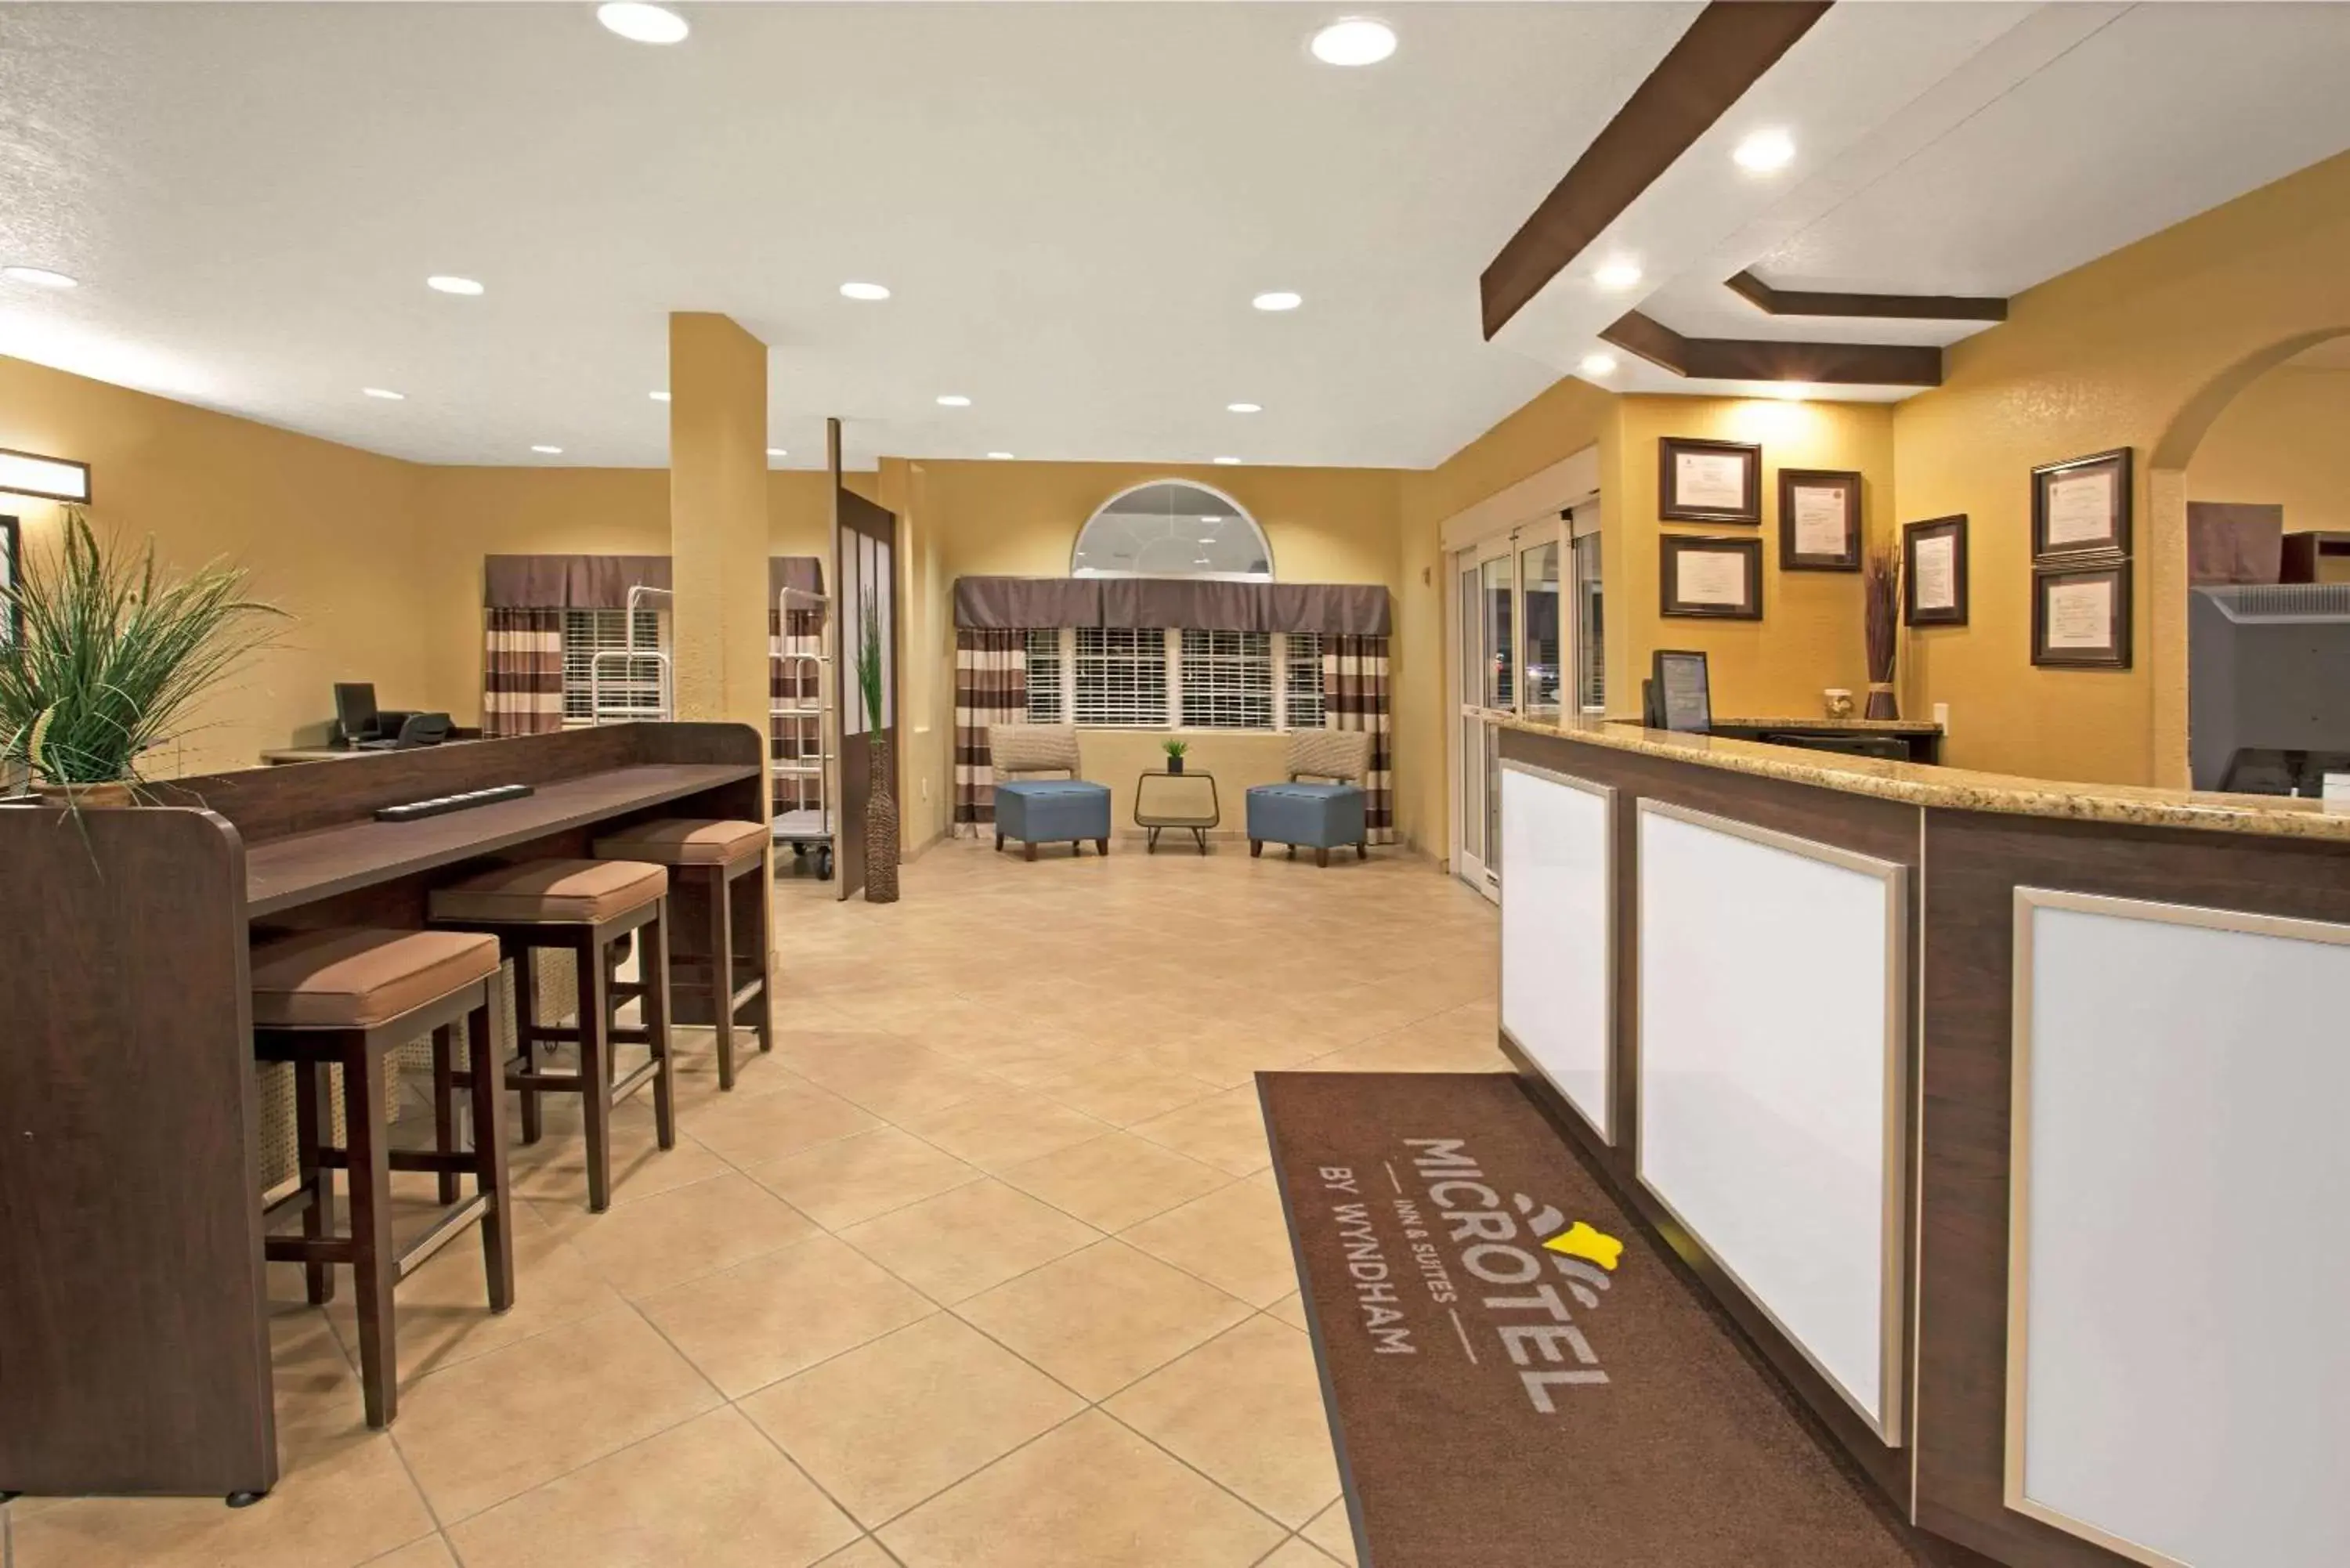 Lobby or reception in Microtel Inn & Suites - Cartersville